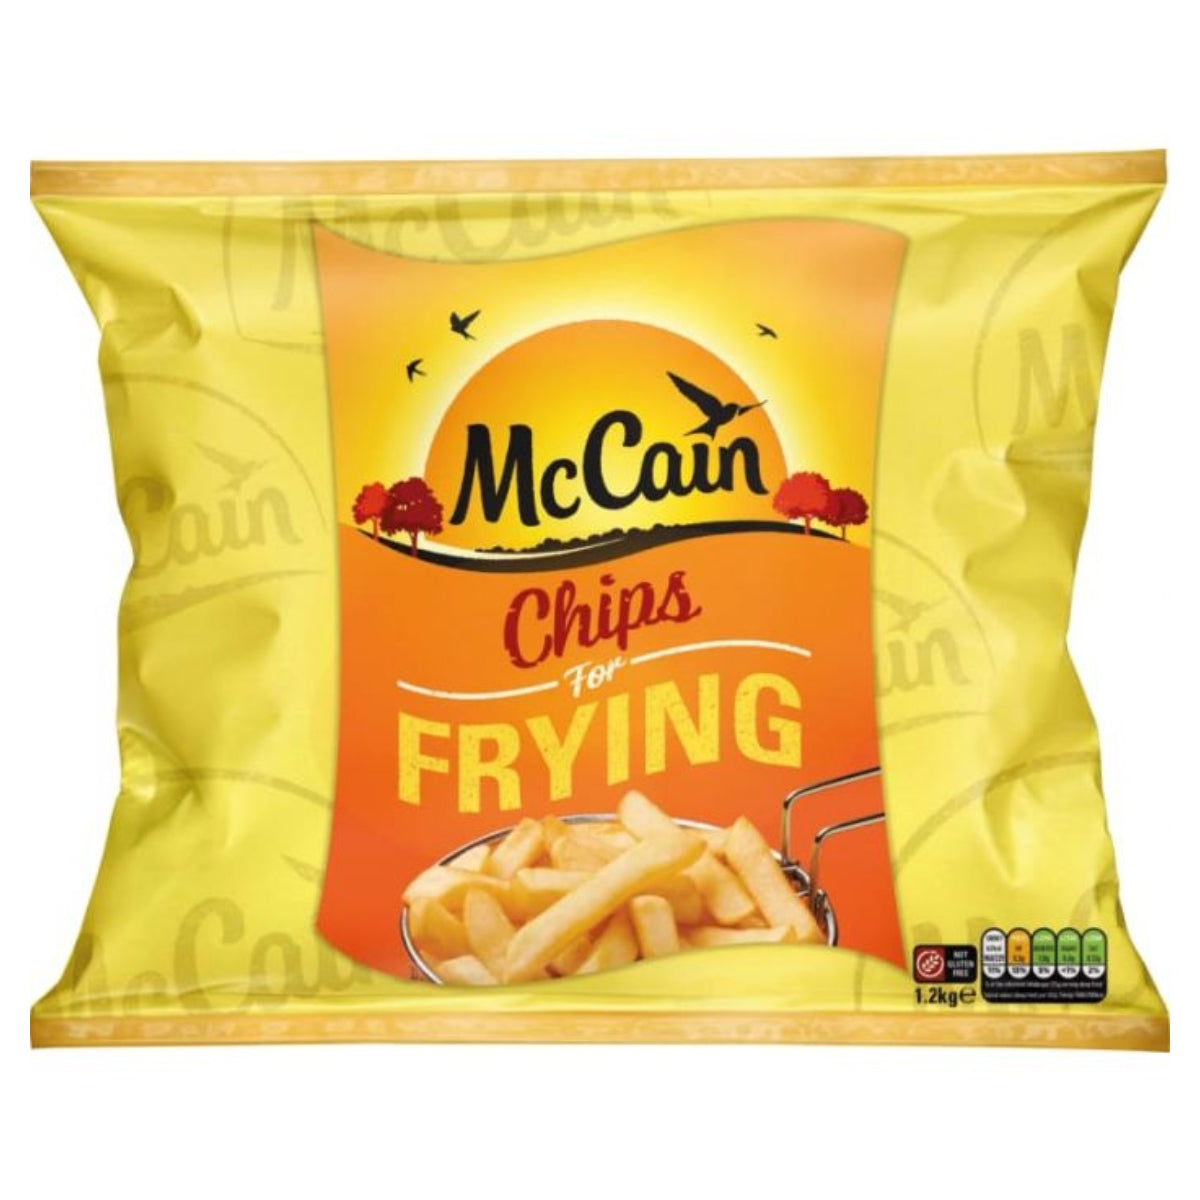 McCain - Chips For Frying - 1.2kg on a white background.